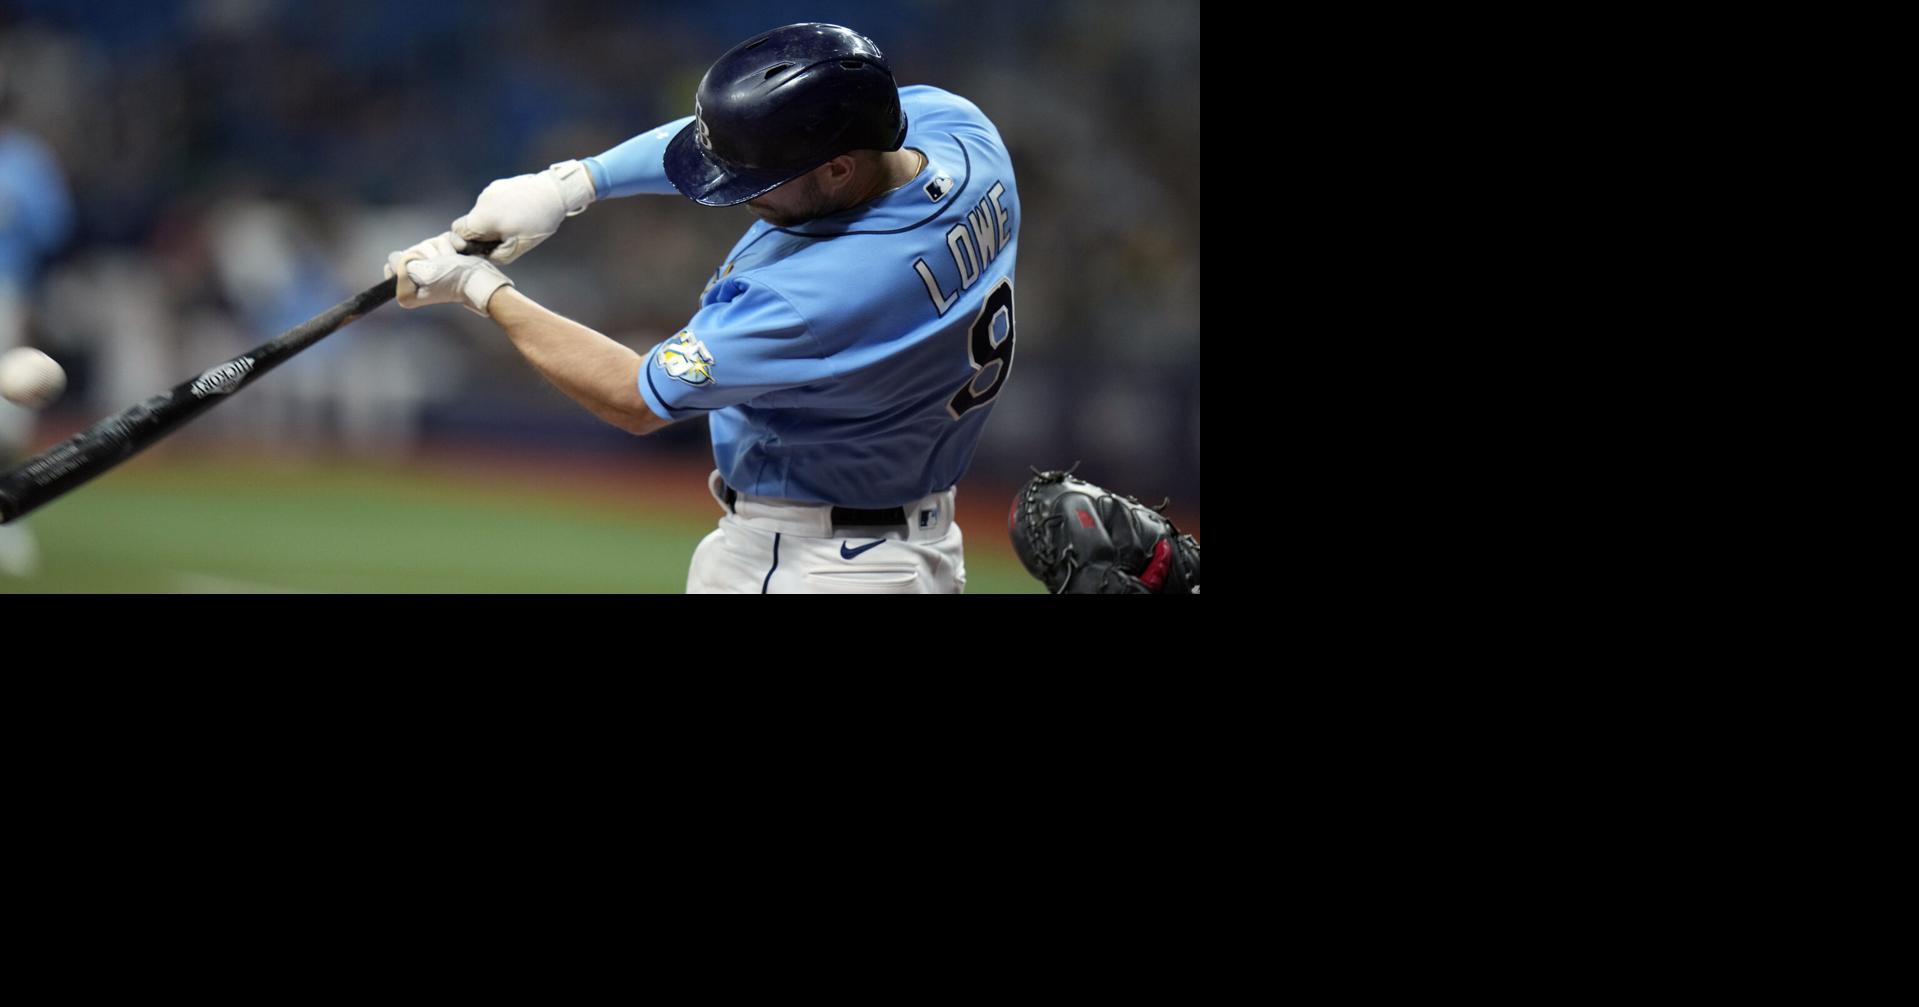 MLB News: Rays outfielder Randy Arozarena thrives on Yankees fans